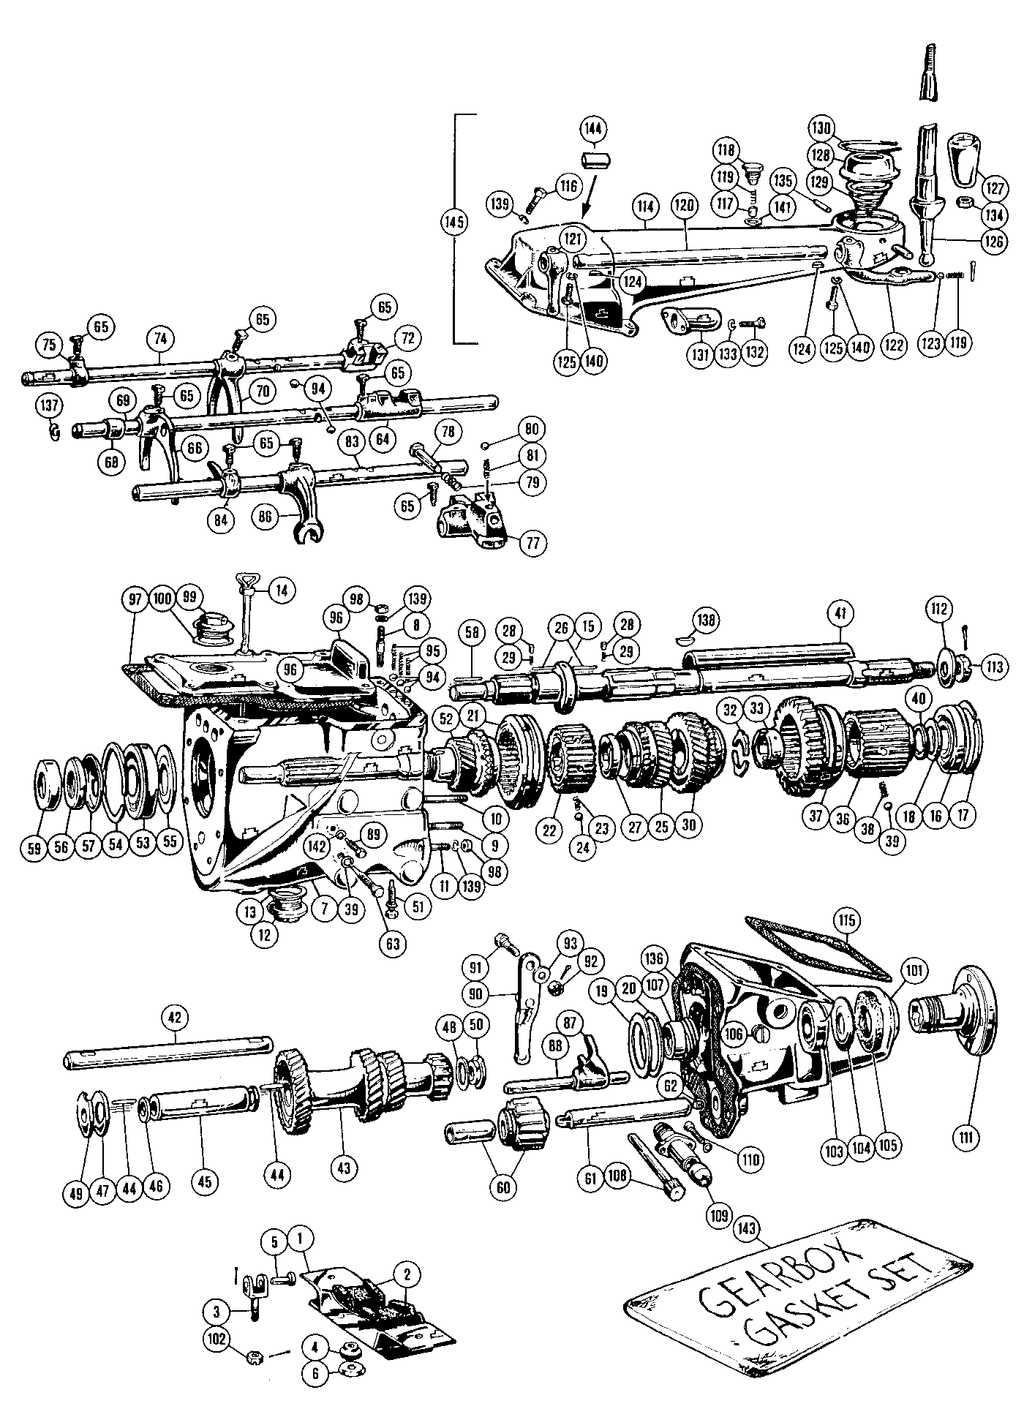 MGTD-TF 1949-1955 - Gearsticks & knobs | Webshop Anglo Parts - Gearbox - 1